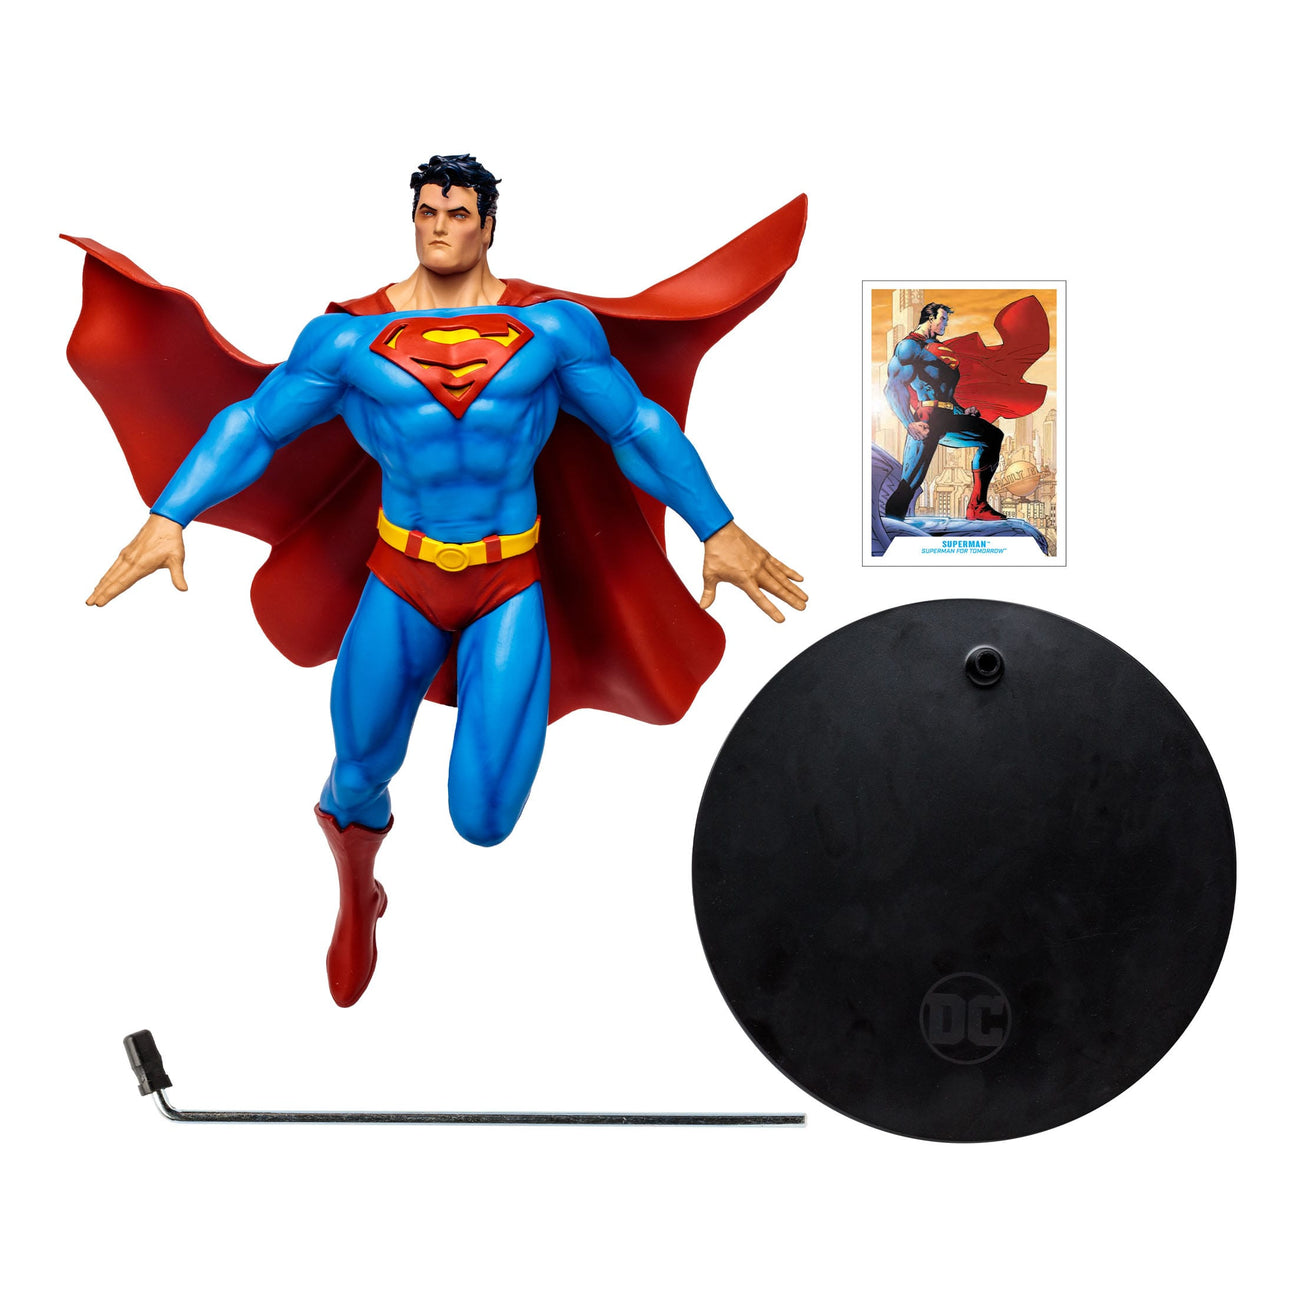 DC Multiverse: Superman (For Tomorrow) – - 30 Statue Underground Mighty cm